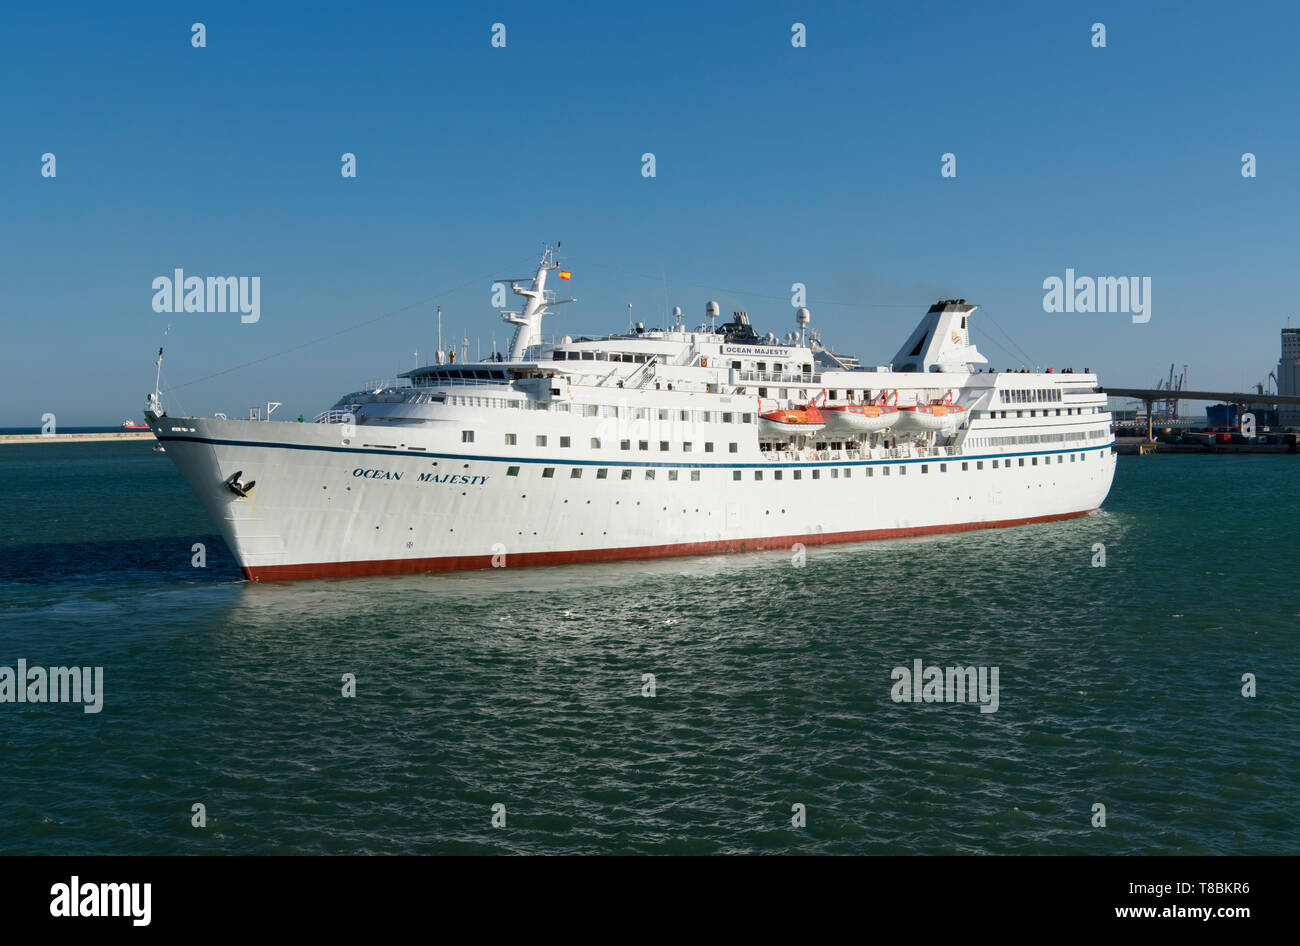 Ocean Majesty cruise of the Majestic International Cruises company maneuvering in the waters of the port of Barcelona. Stock Photo